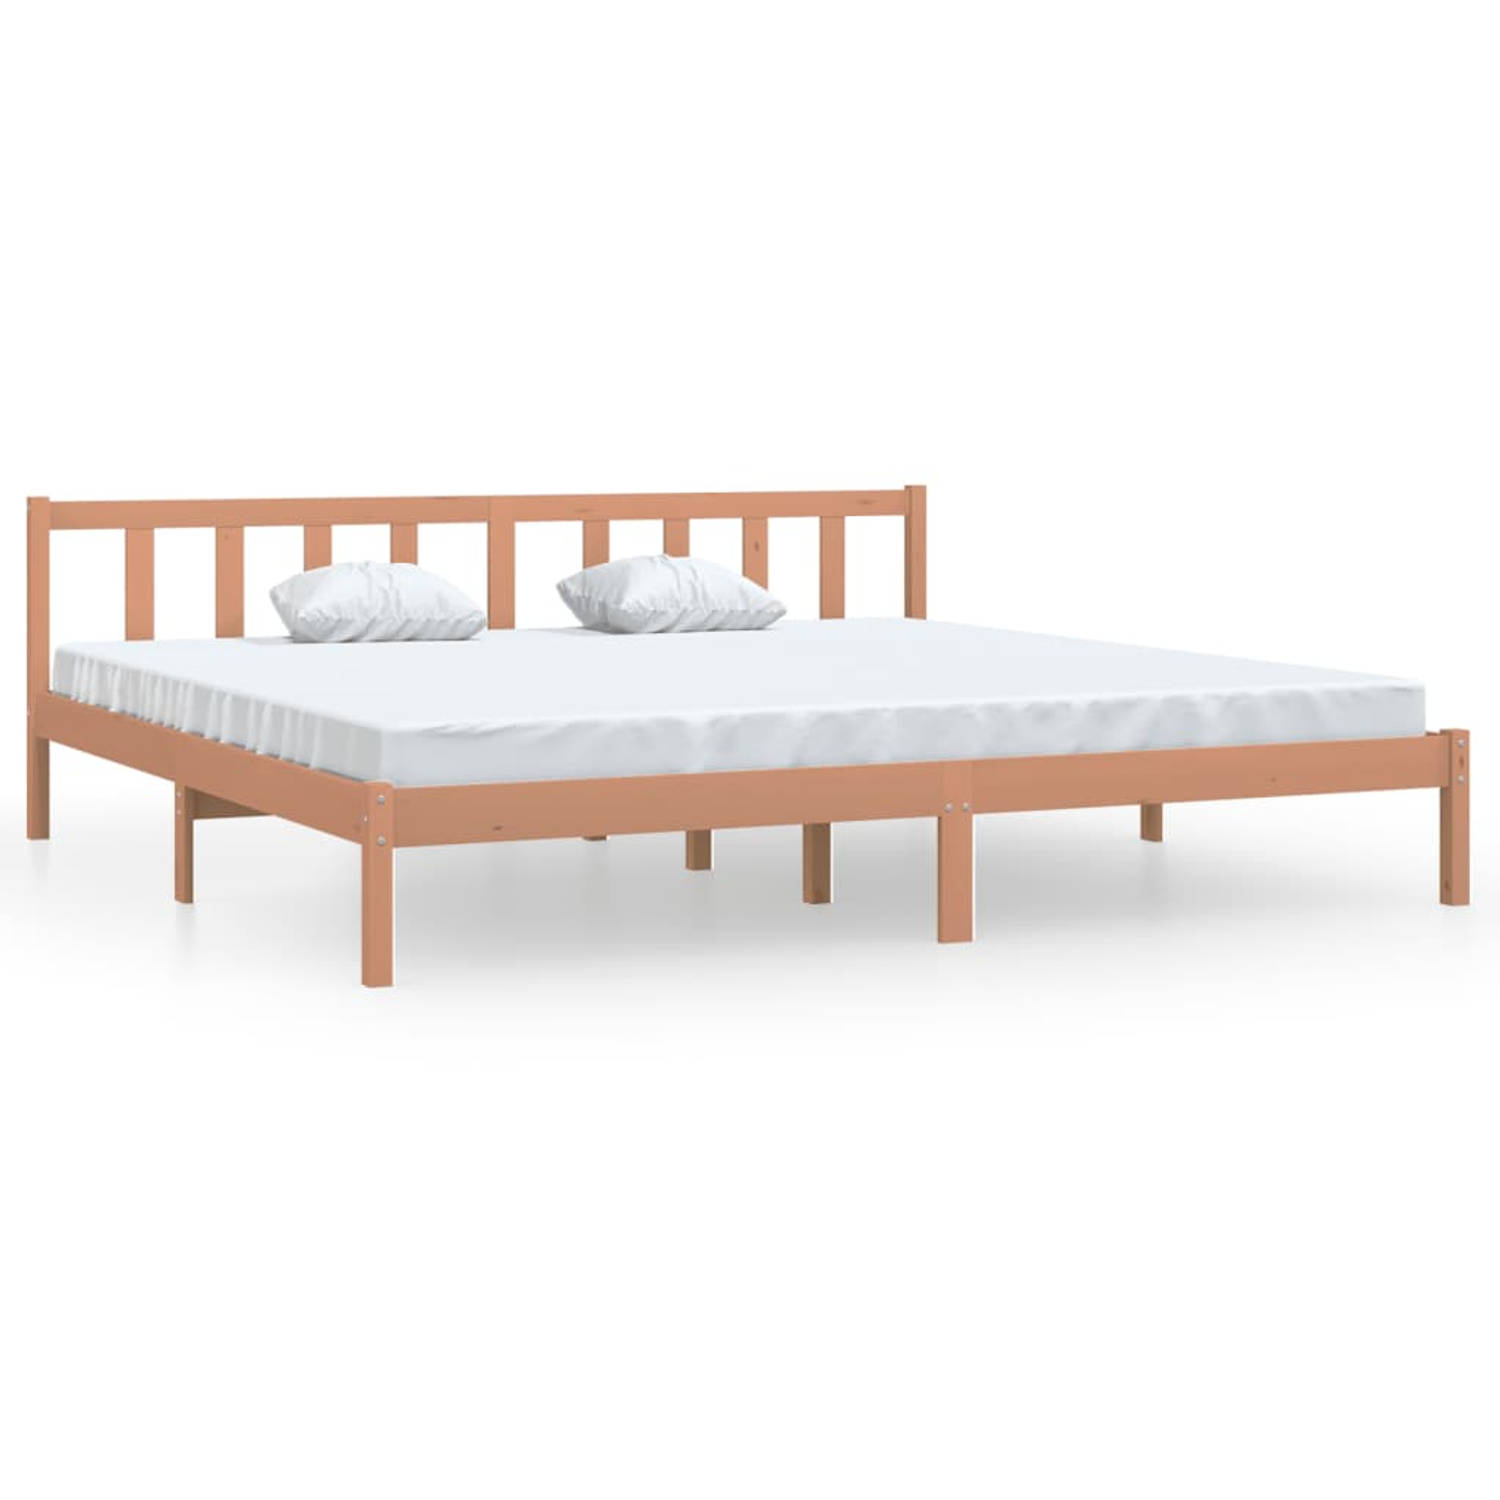 The Living Store Bedframe massief grenenhout honingbruin 200x200 cm - Bedframe - Bedframe - Bed Frame - Bed Frames - Bed - Bedden - 1-persoonsbed - 1-persoonsbedden - Eenpersoons B